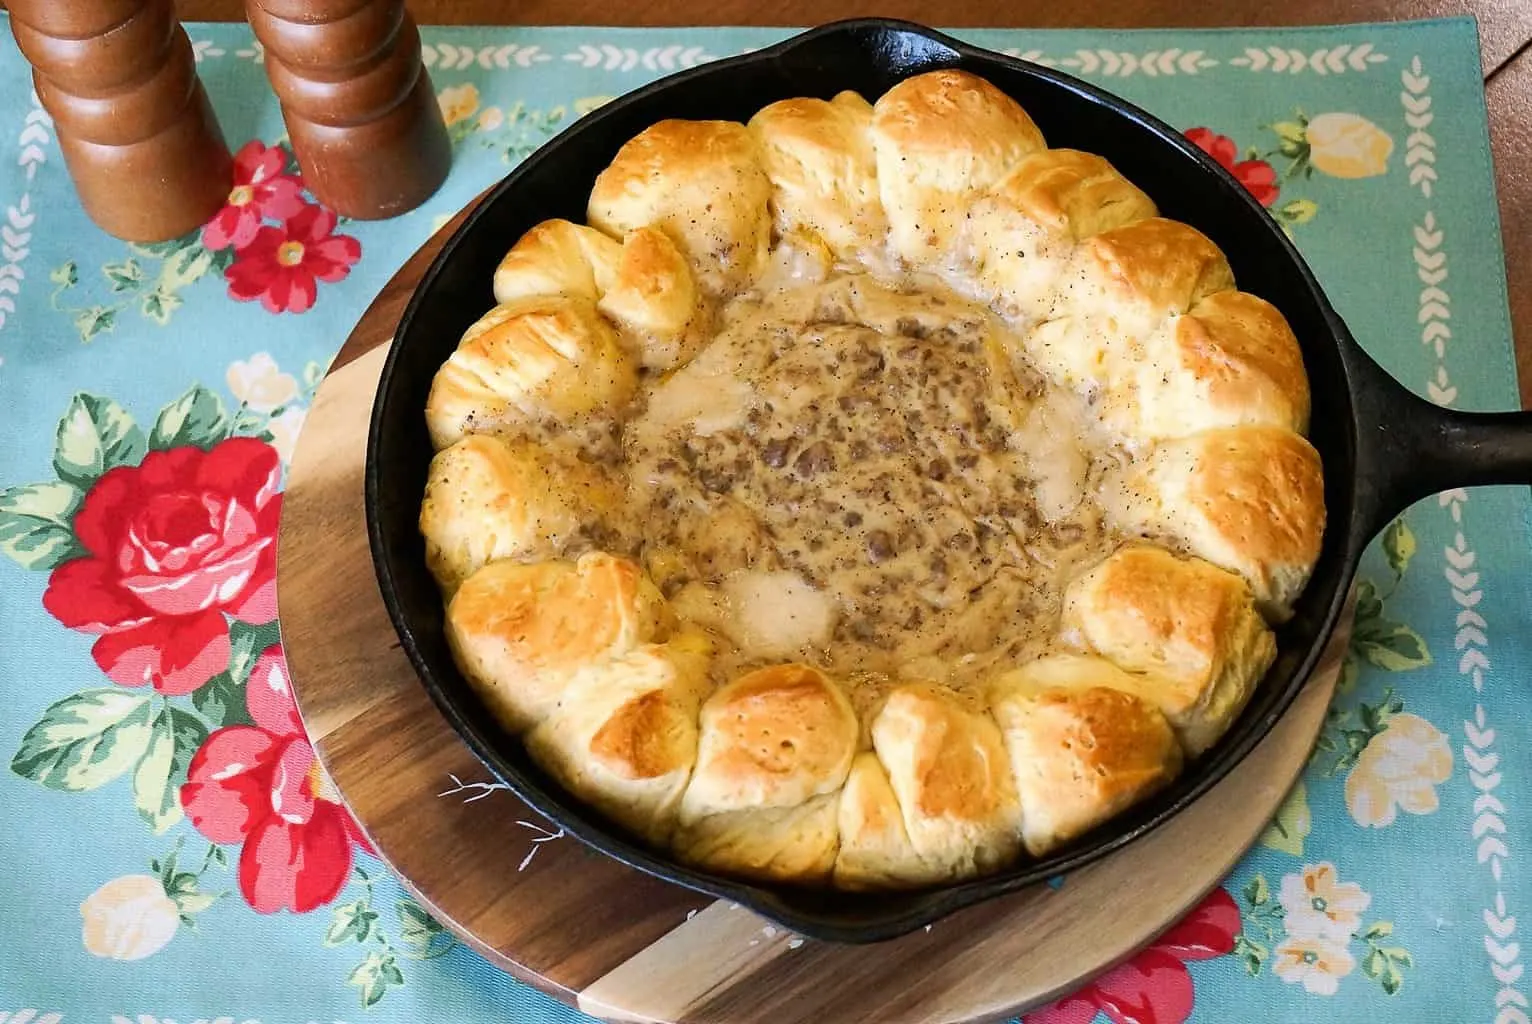 Biscuit and Gravy Ring in Cast Iron Skillet